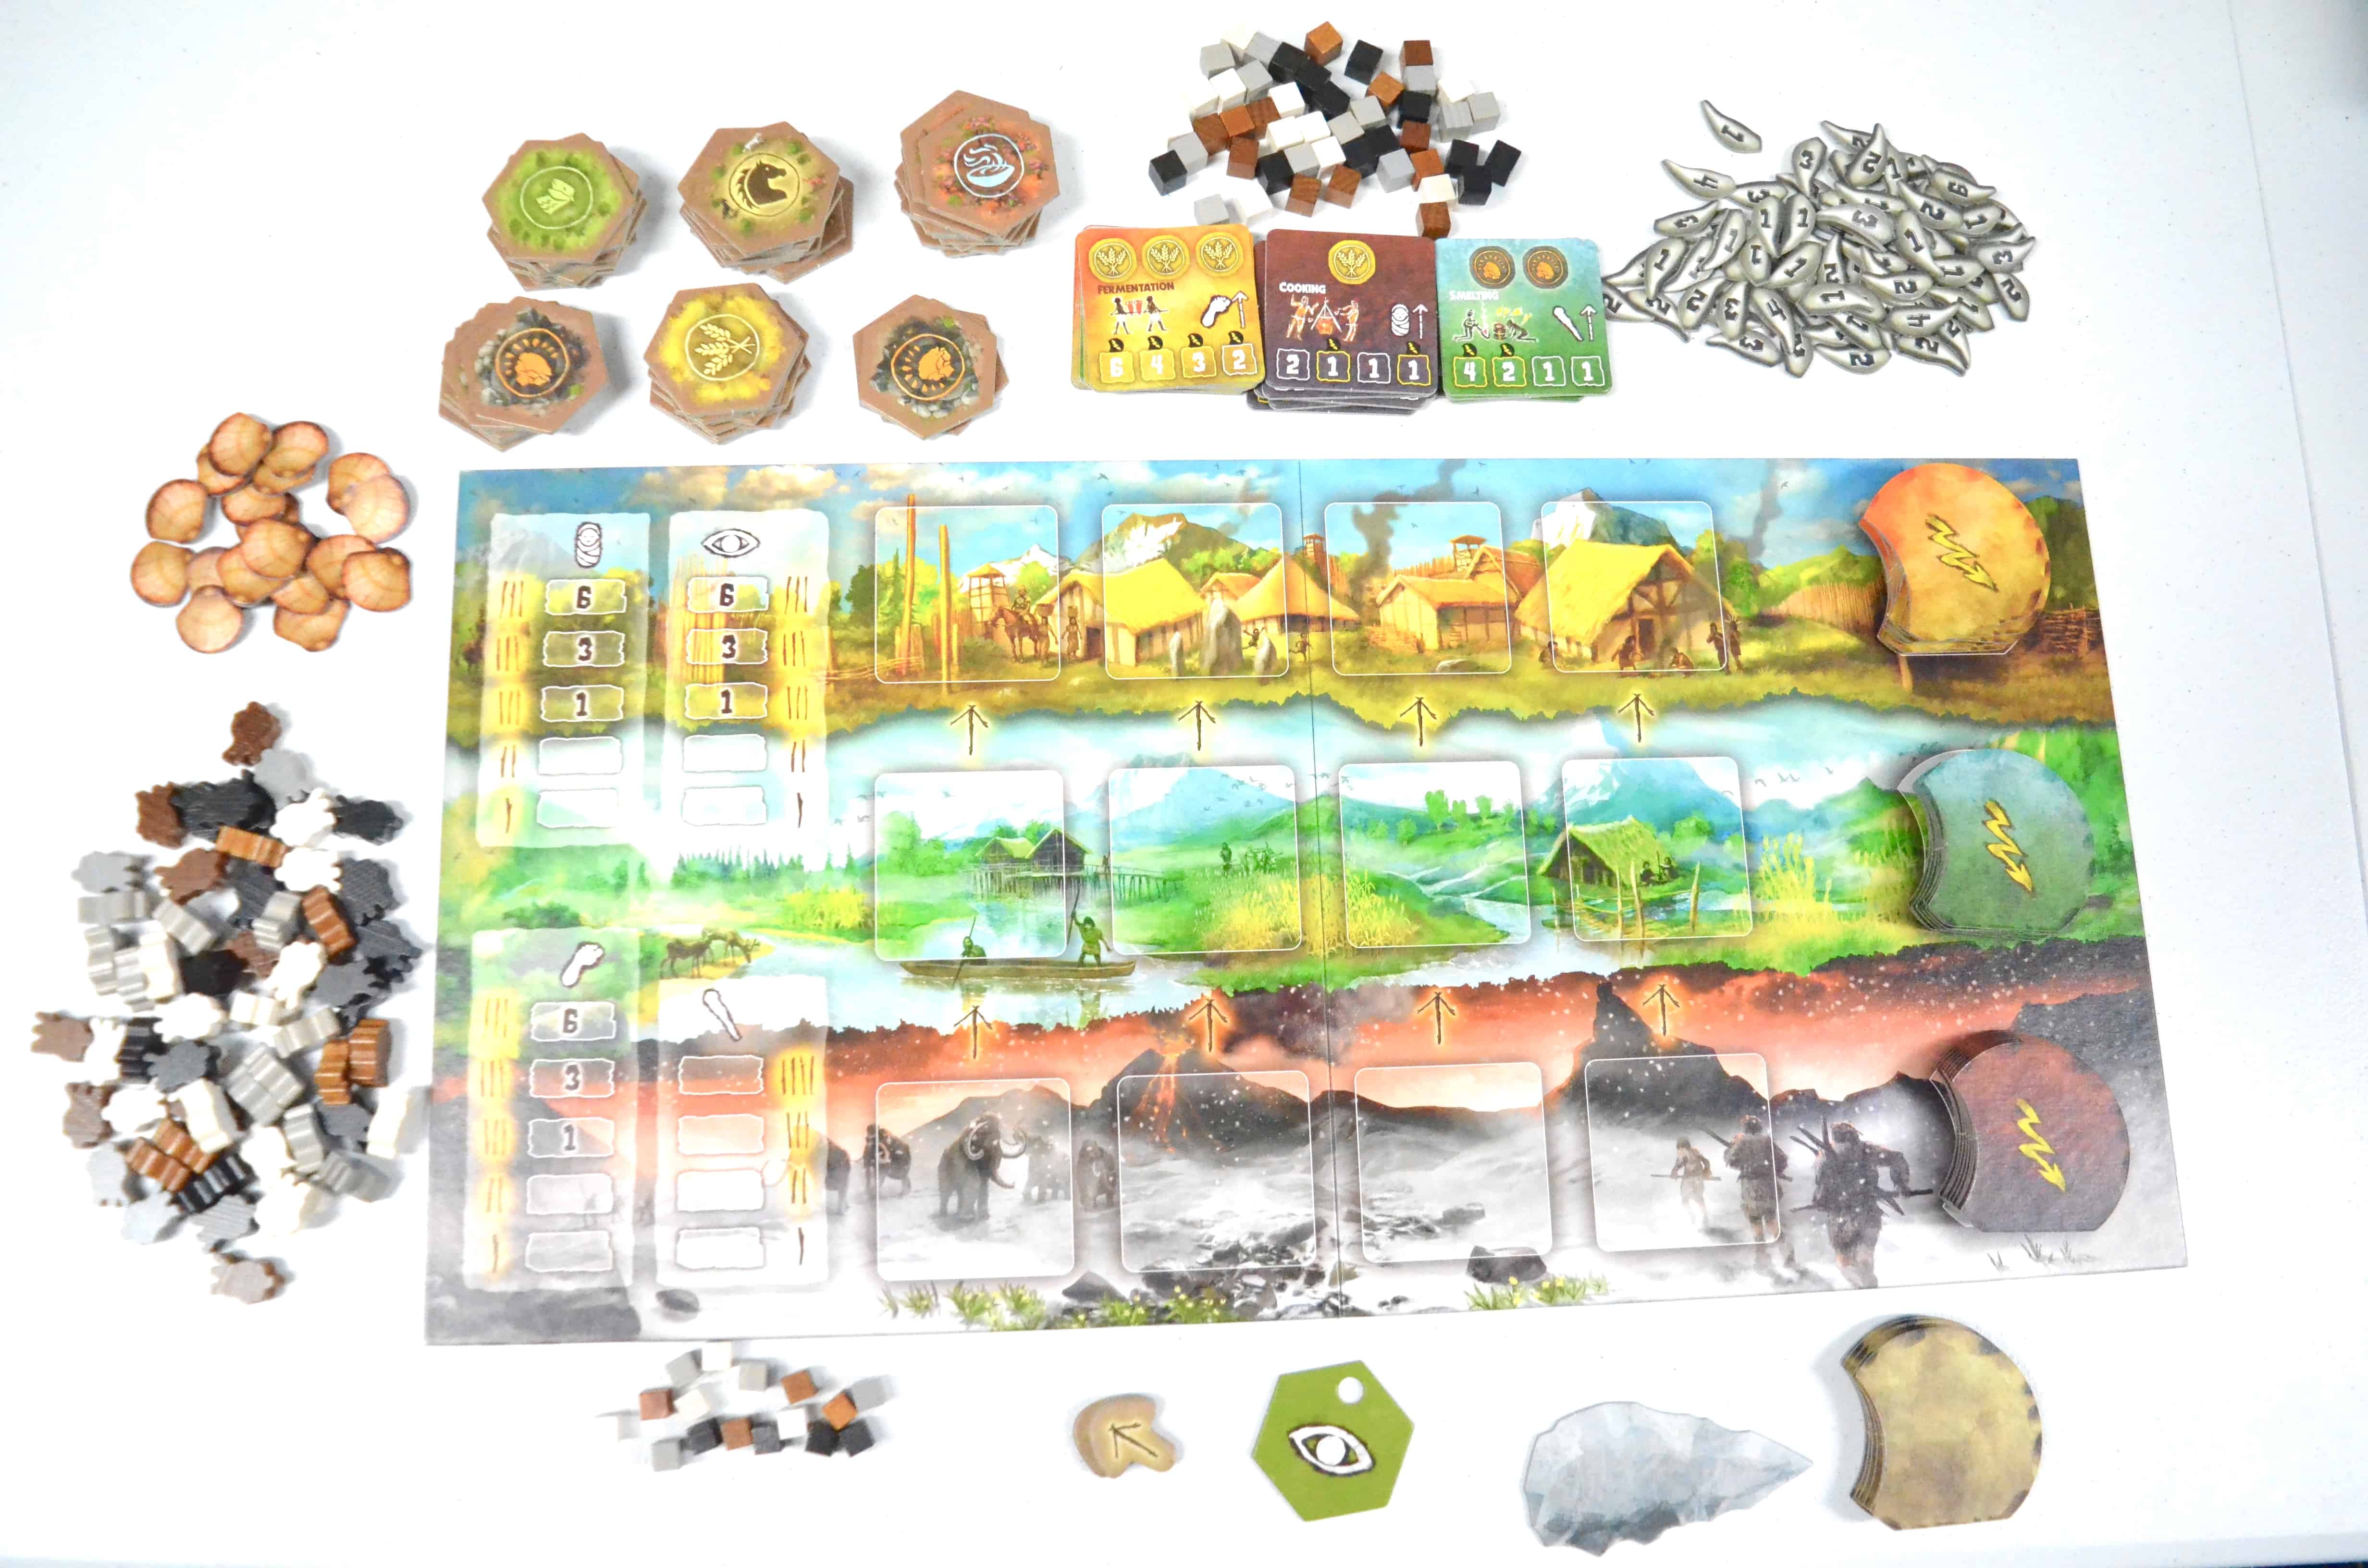 Tribes strategy game board